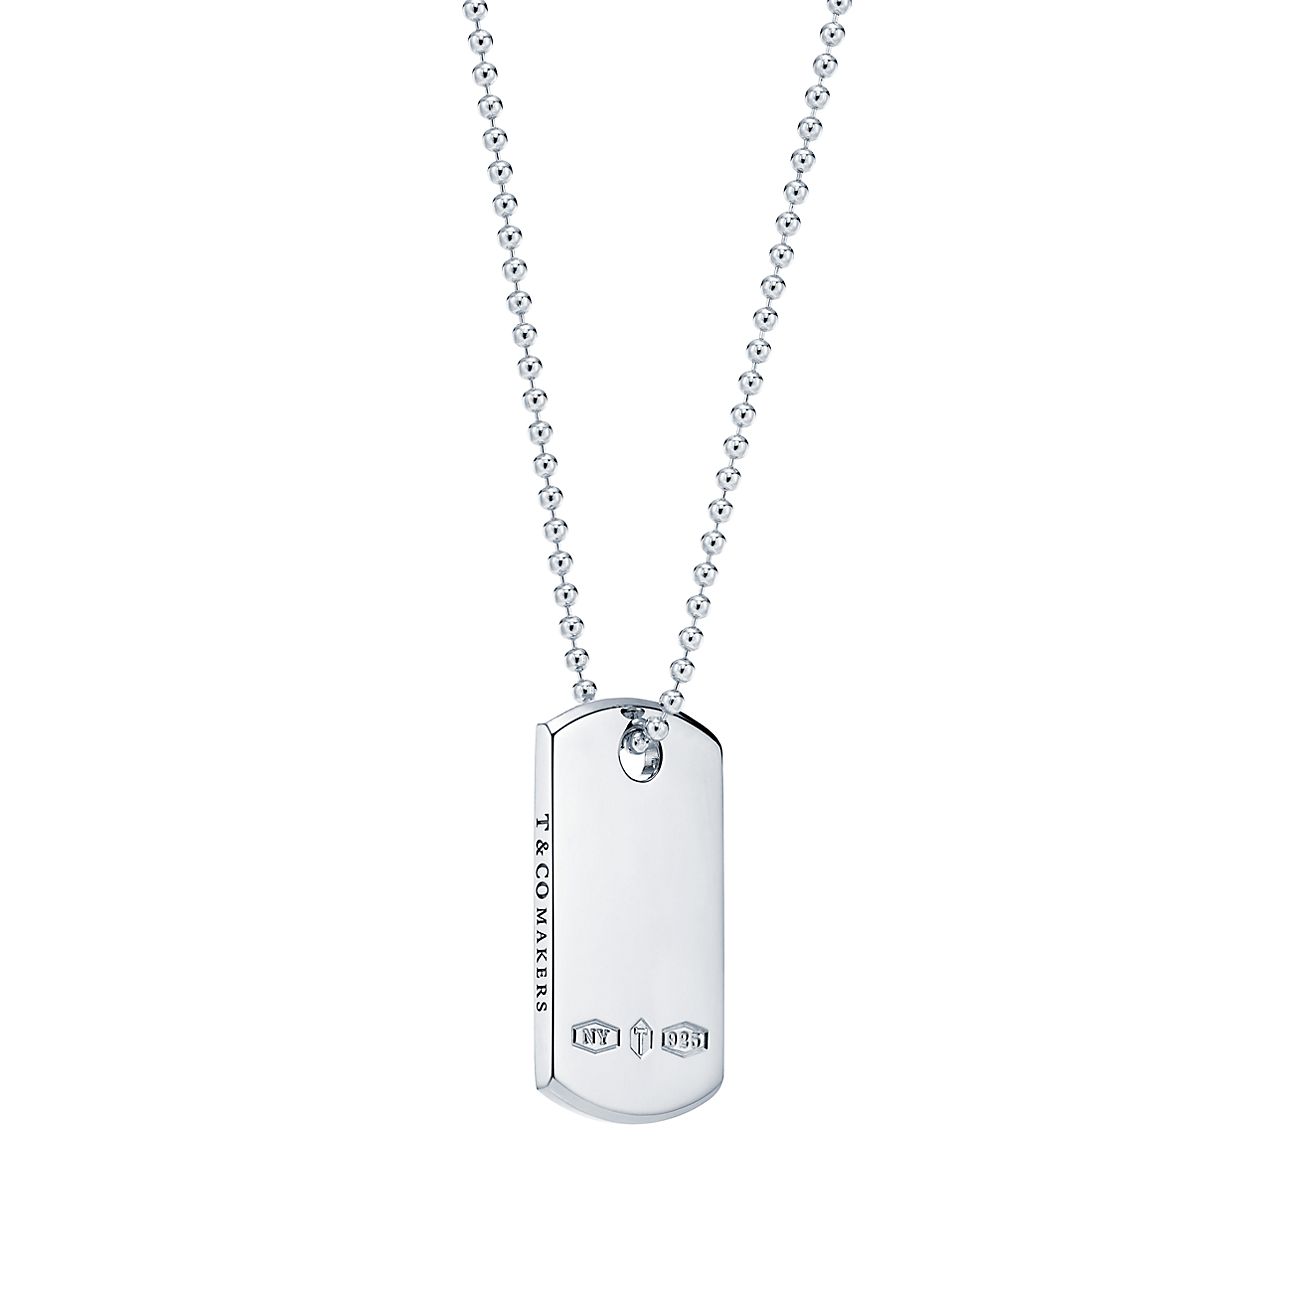 Small Dog Tag ID Necklace, Silver